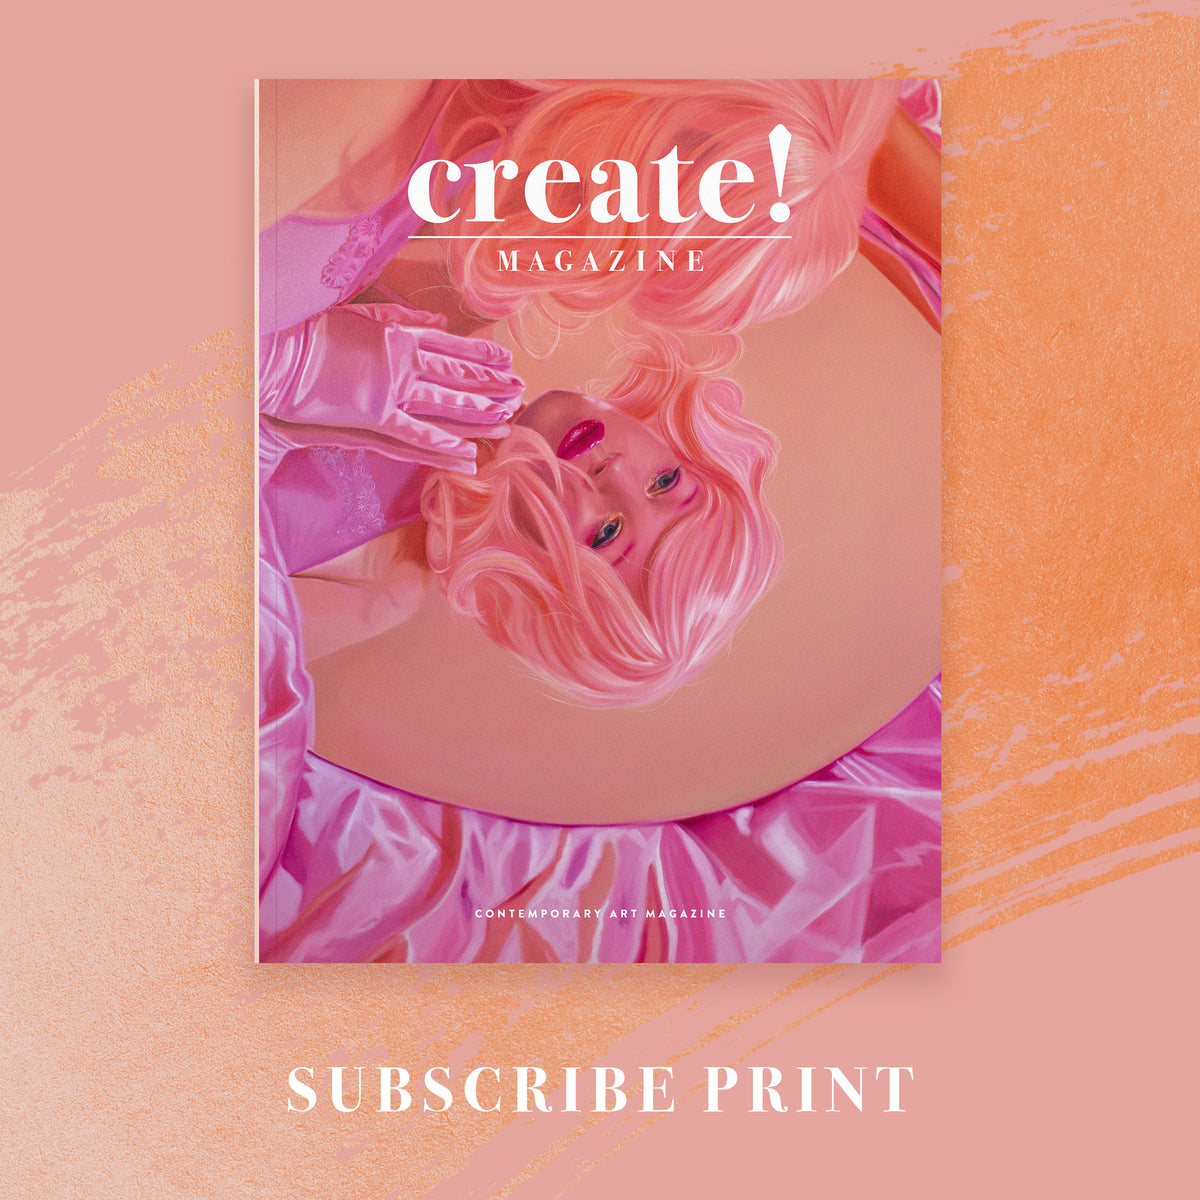 United States | Yearly Print Subscription (Starting issue #42) 4 Issues